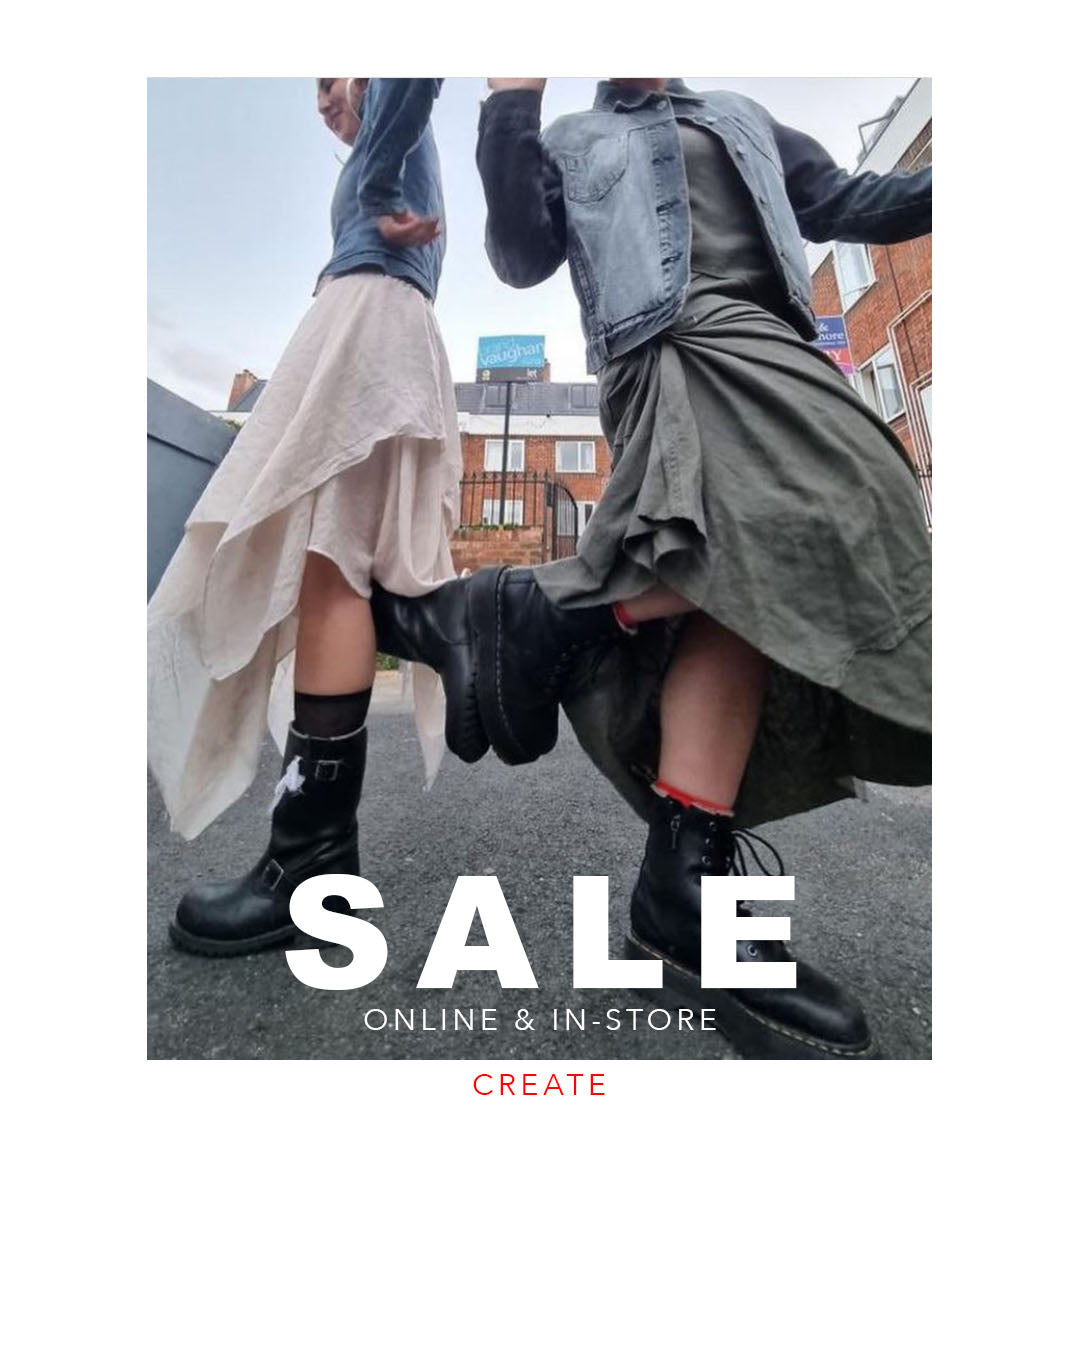 dressmaking fabric sale advert in Brighton showing two handmade skirts